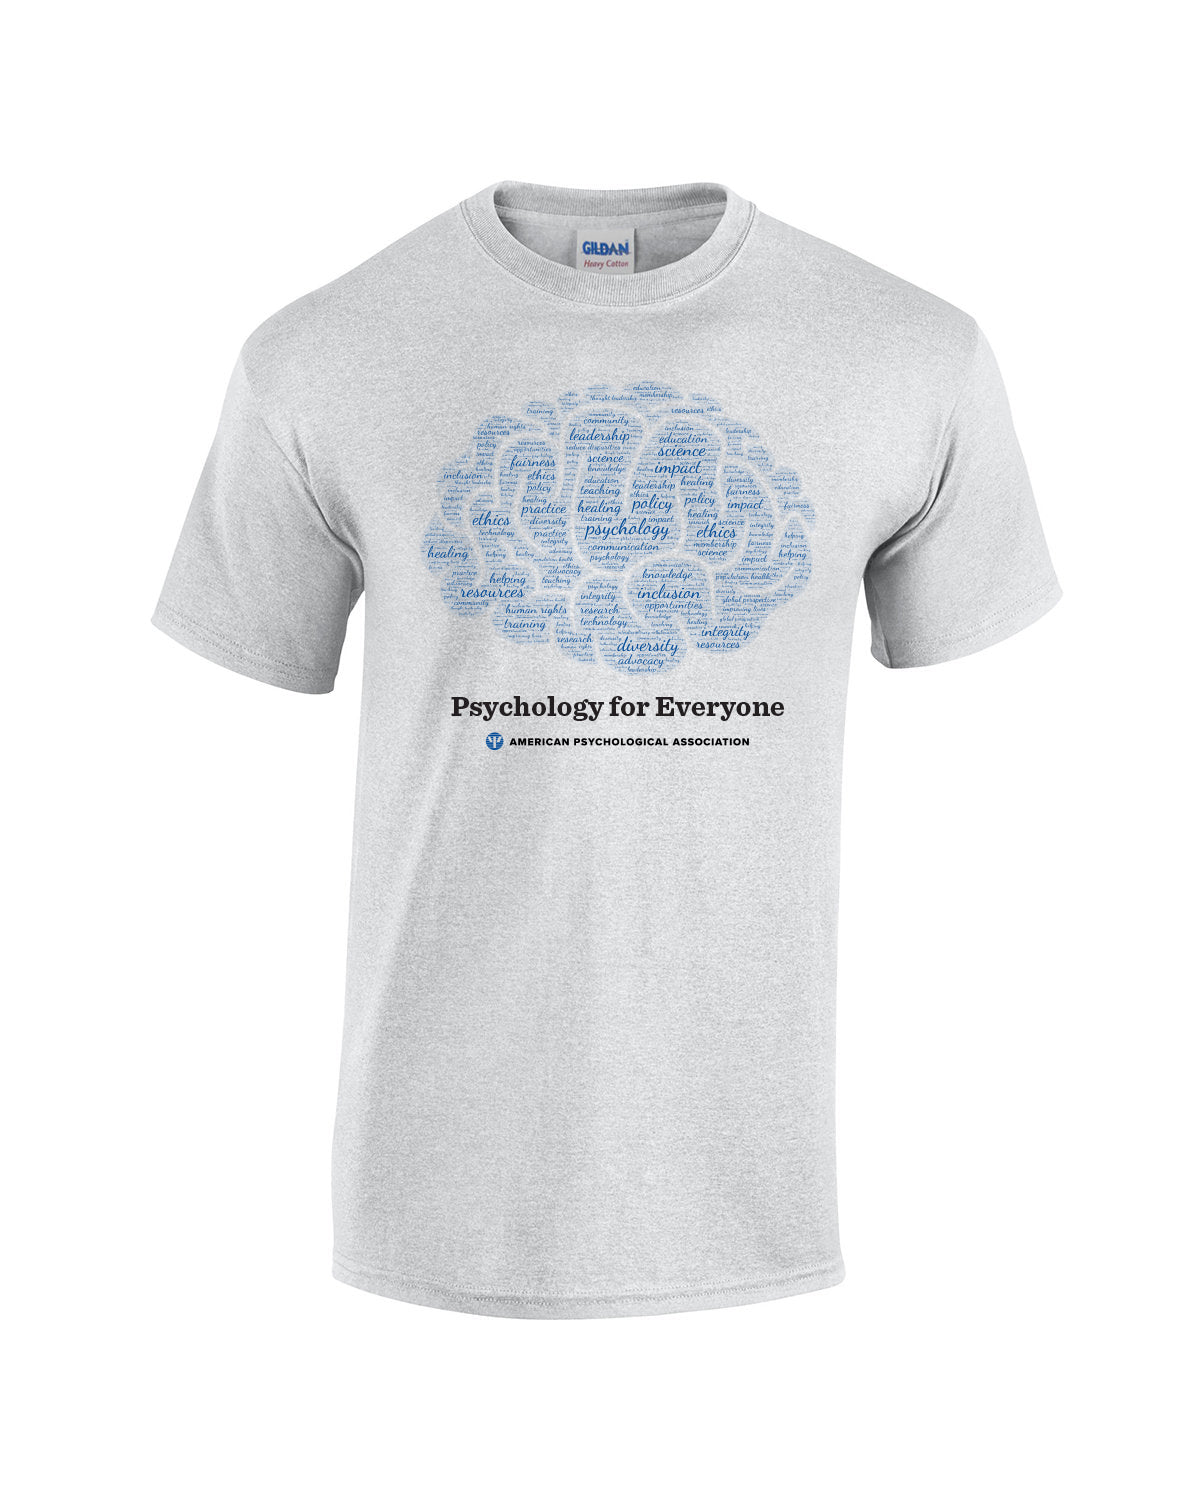 Psychology For Everyone T-shirt – Classic Fit